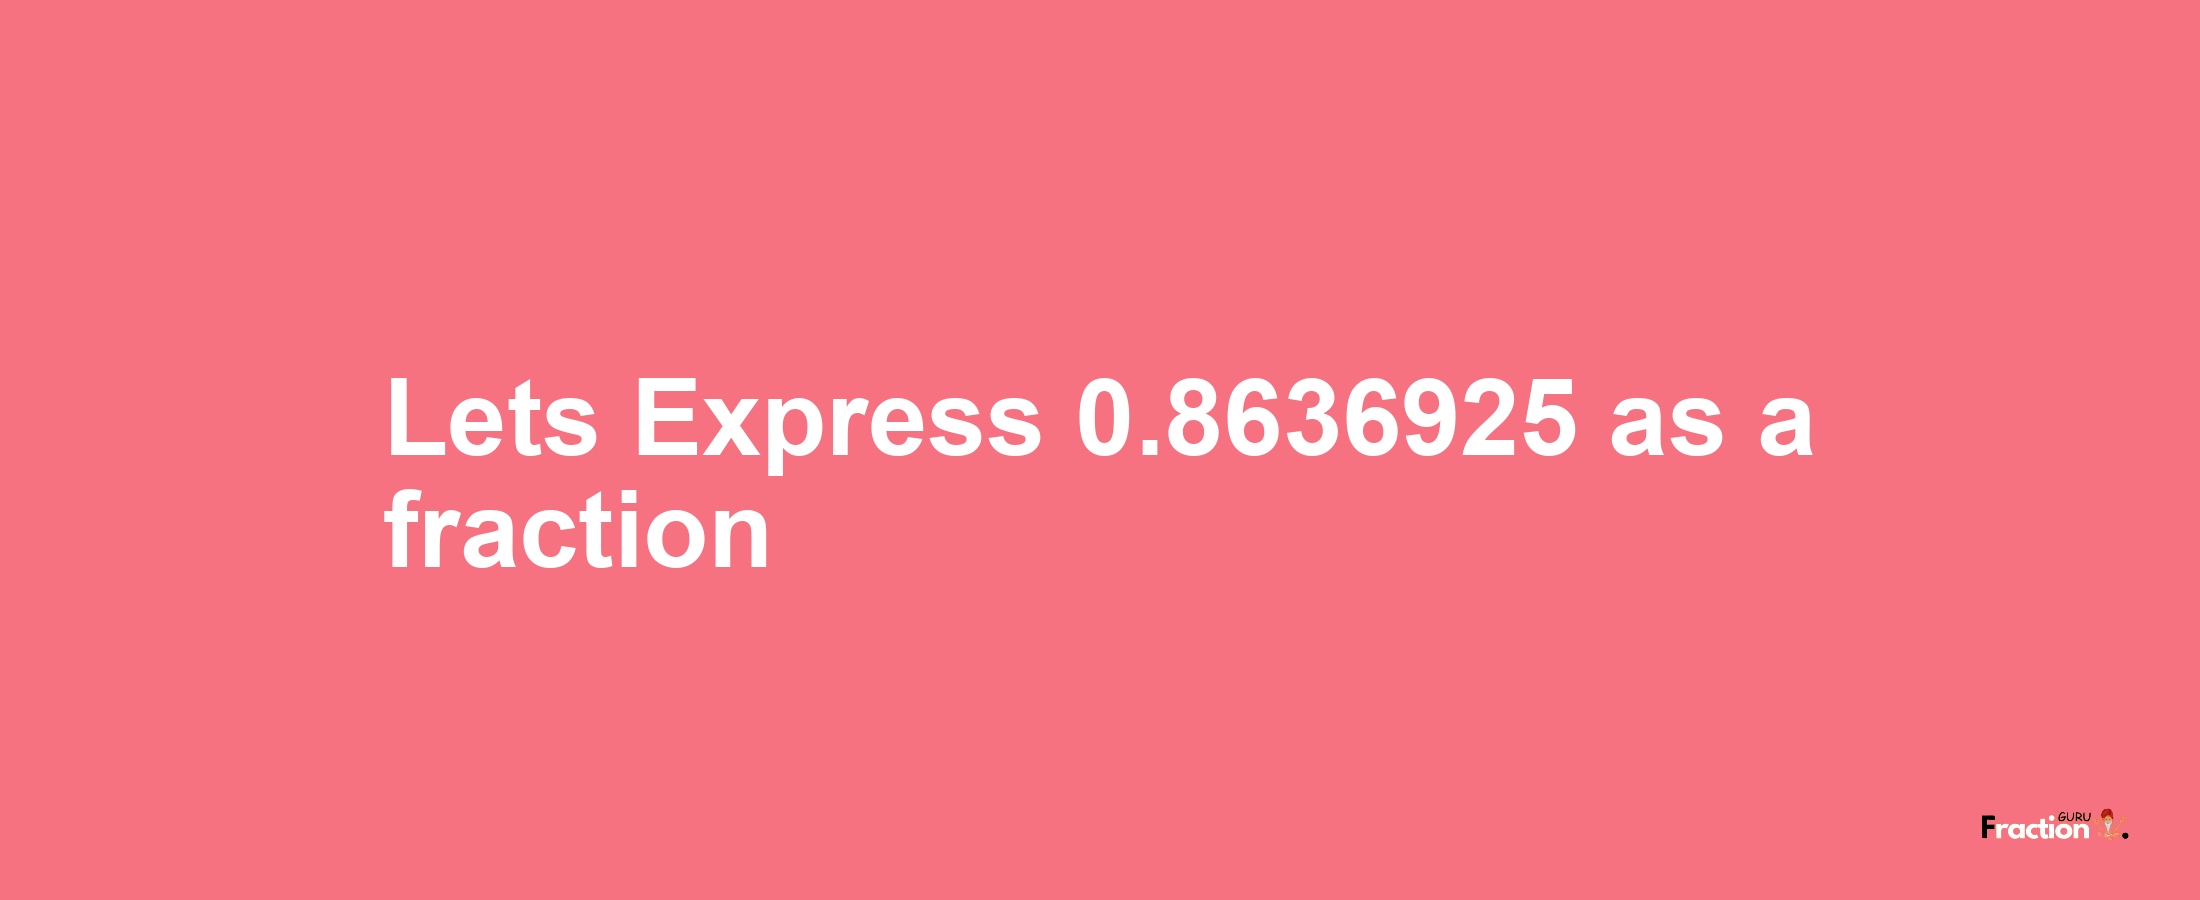 Lets Express 0.8636925 as afraction